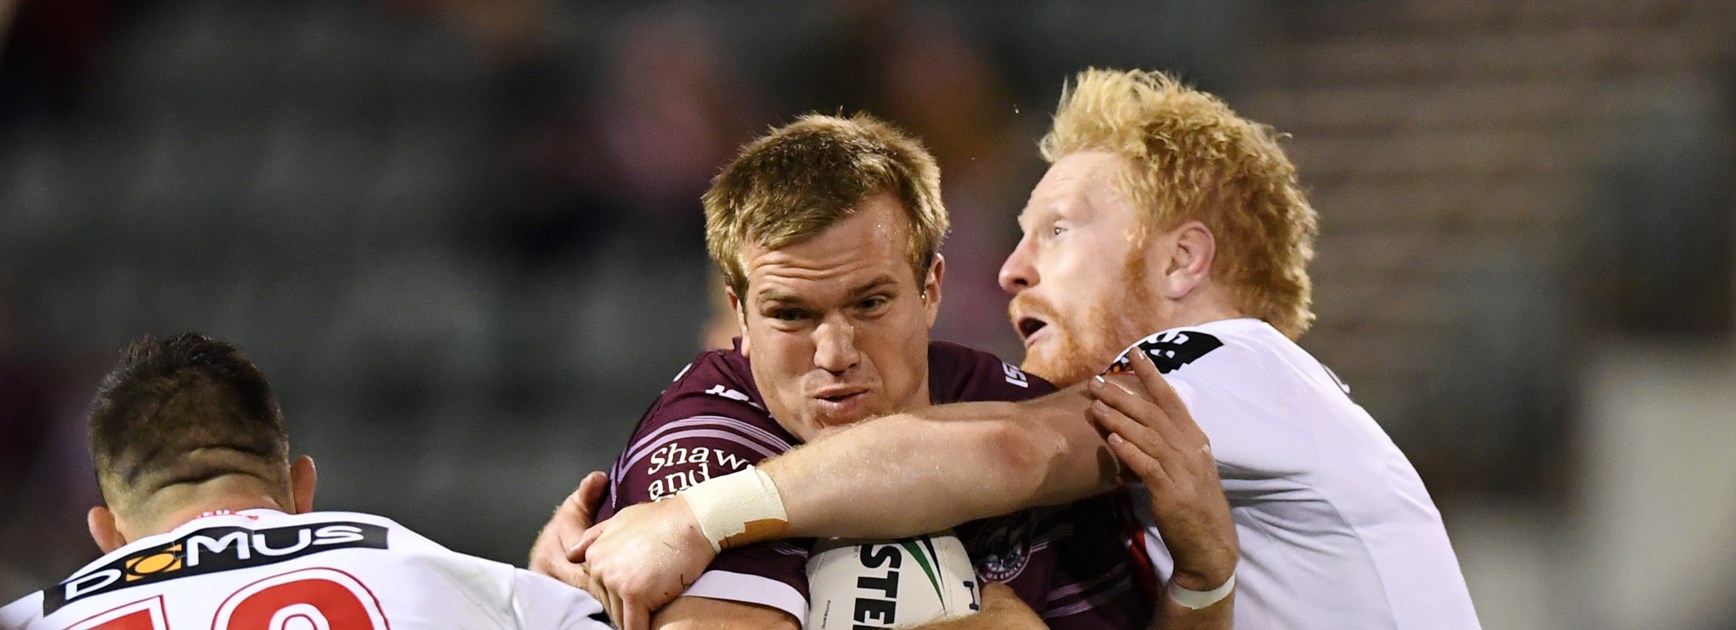 NRL | Manly lose 32-8 to Dragons